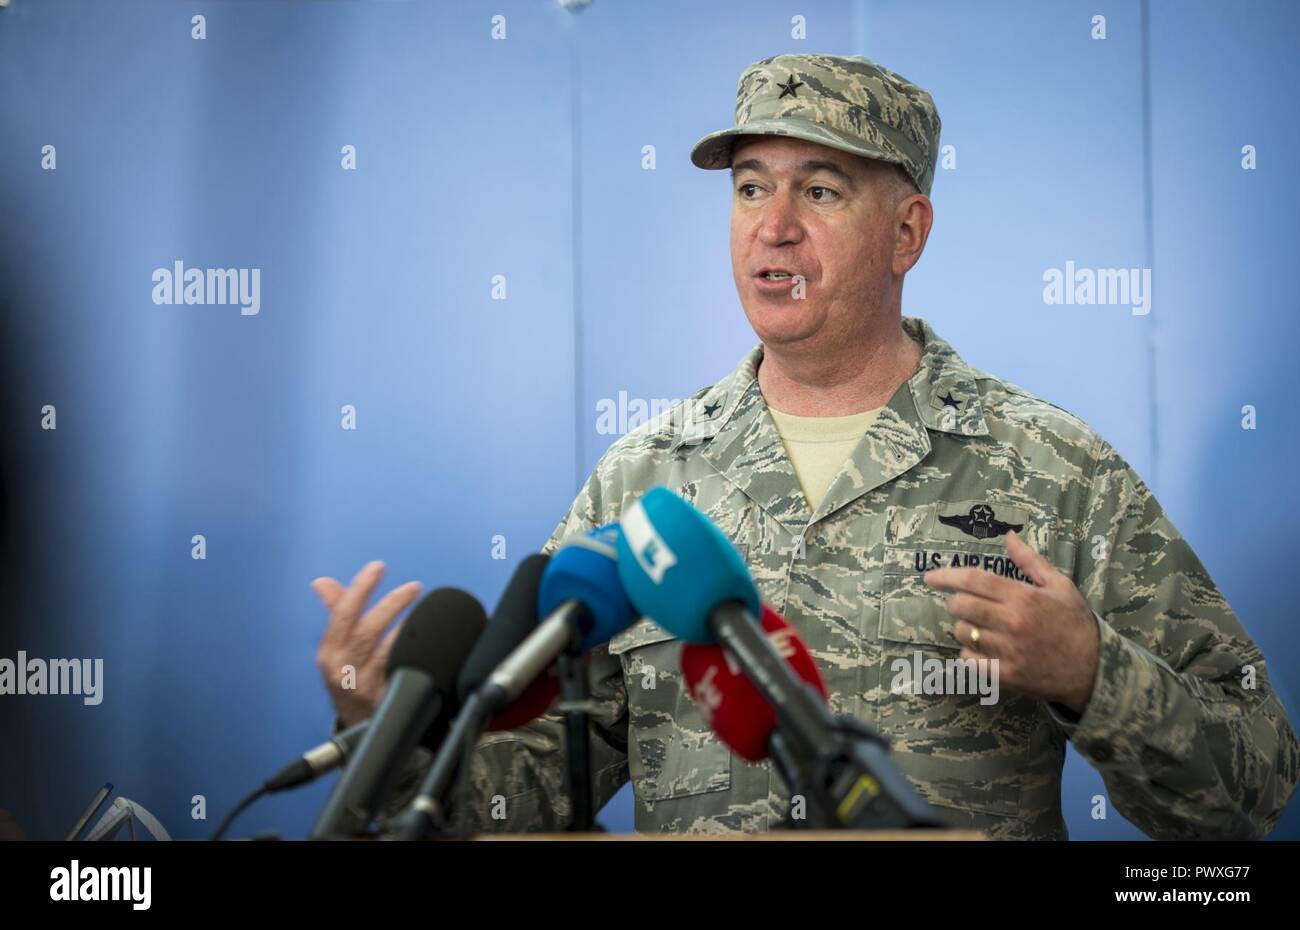 U.S. Army Brig. Gen. Giselle Wilz transfers authority of NATO Headquarters Sarajevo to U.S. Air Force Brig. Gen. Robert Huston during a ceremony held on June 27th, 2017 at Camp Butmir, Bosnia and Herzegovina. Stock Photo